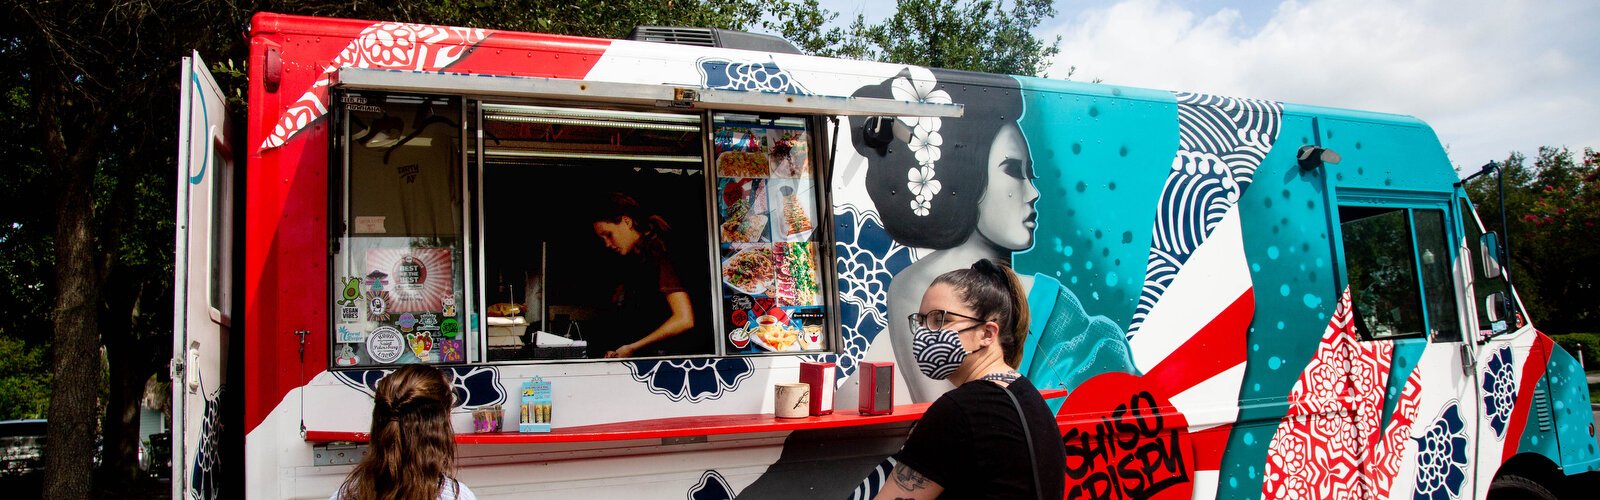 Shisho Crispy serves up colorful Japanese inspired dishes at the Downtown Dunedin Vegan Food Truck Rally & Market.